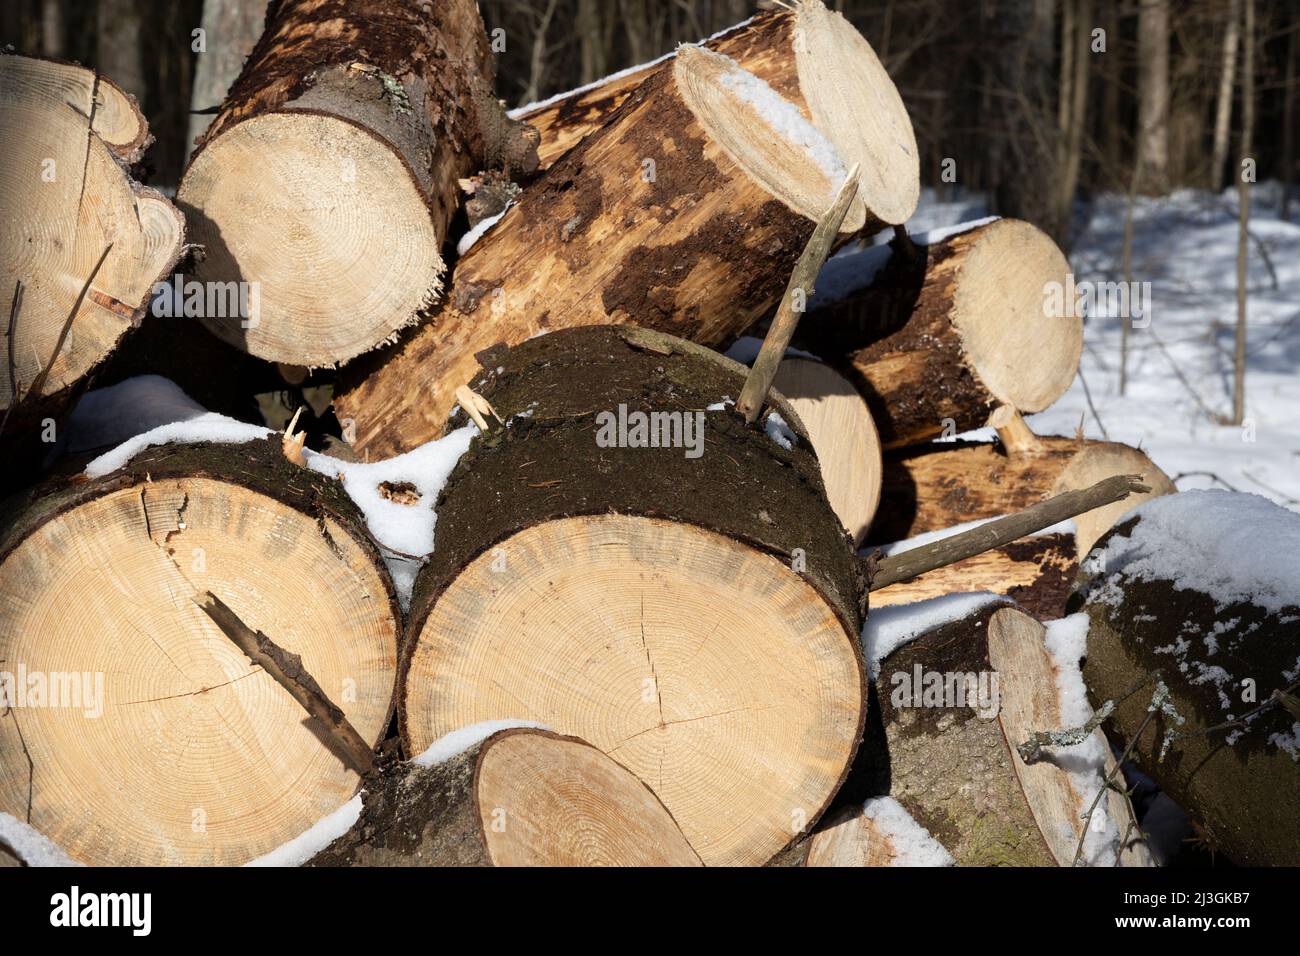 Top of a pile of harvested firewood on a sunny March day close-up Stock Photo